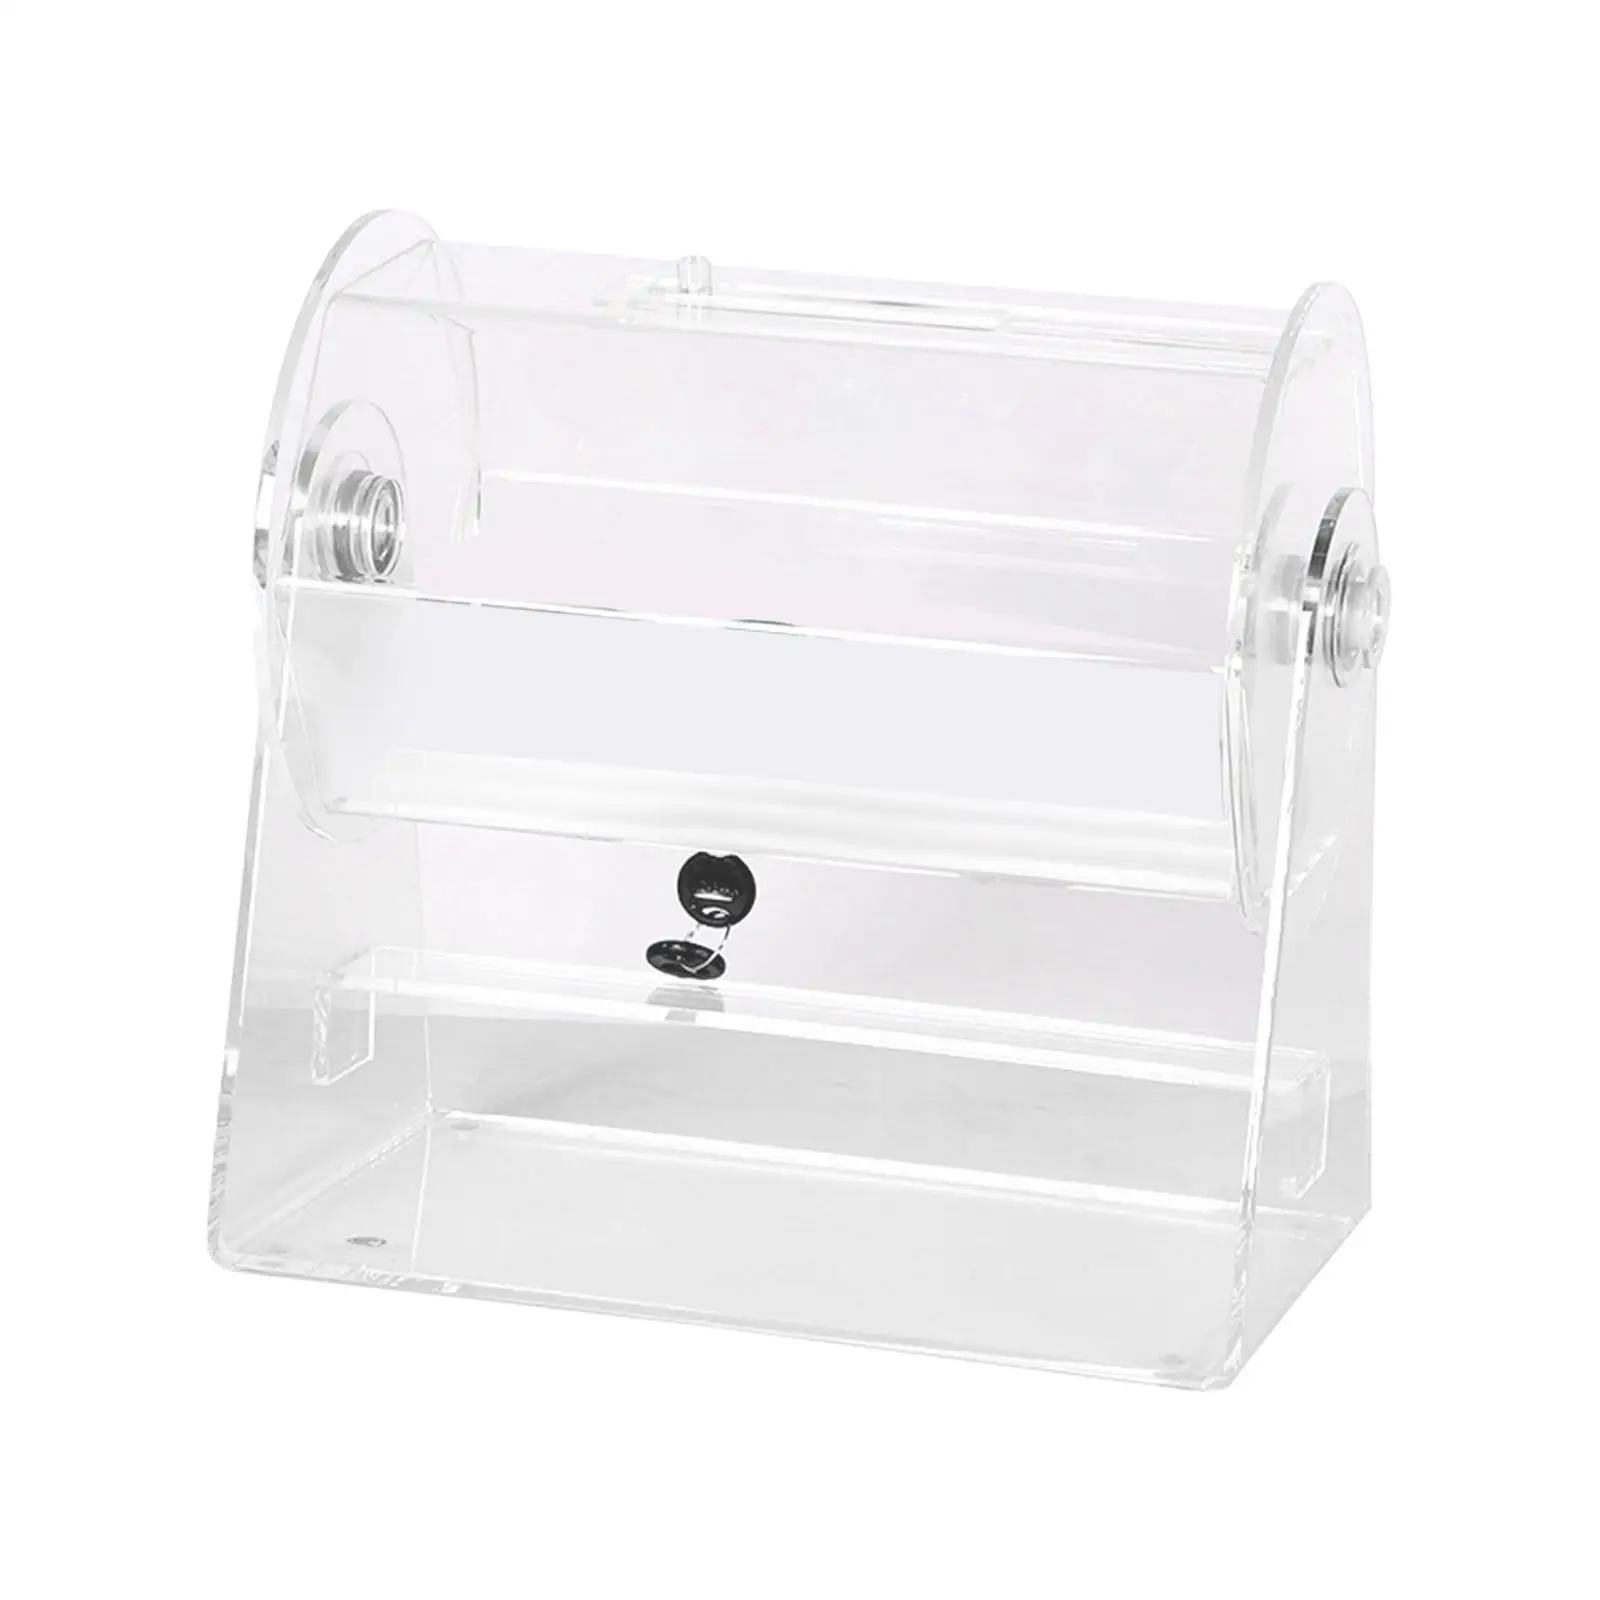 Acrylic Raffle Drum Parent Child Games Raffle Case Turntable Selection Machine Lottery Portable Lottery Machine for Holiday Home